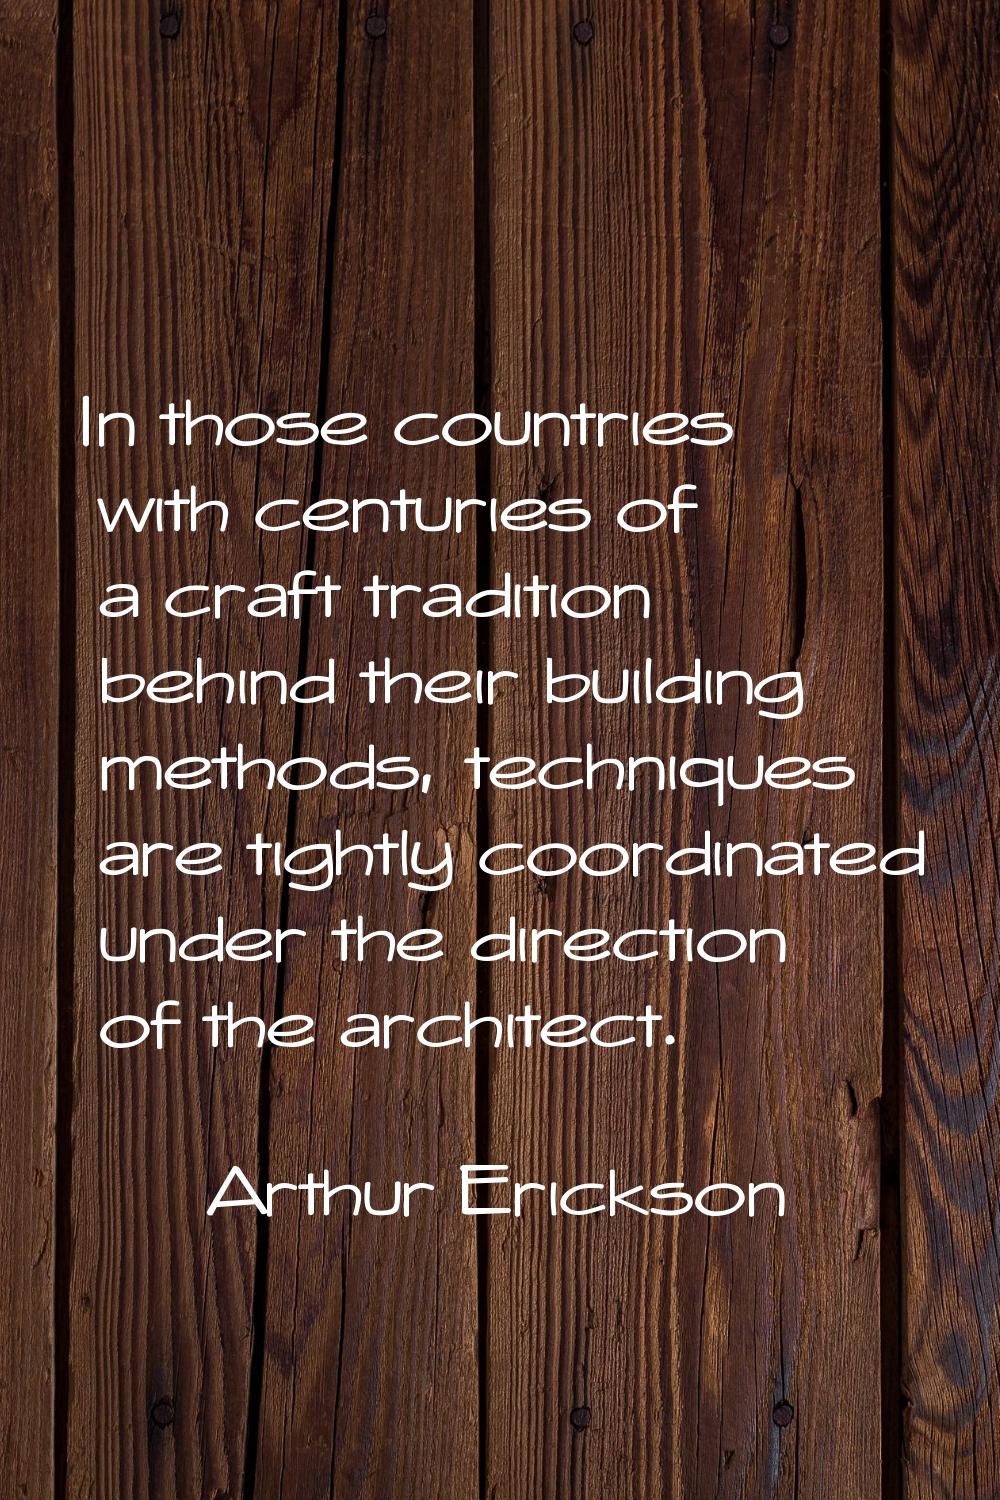 In those countries with centuries of a craft tradition behind their building methods, techniques ar